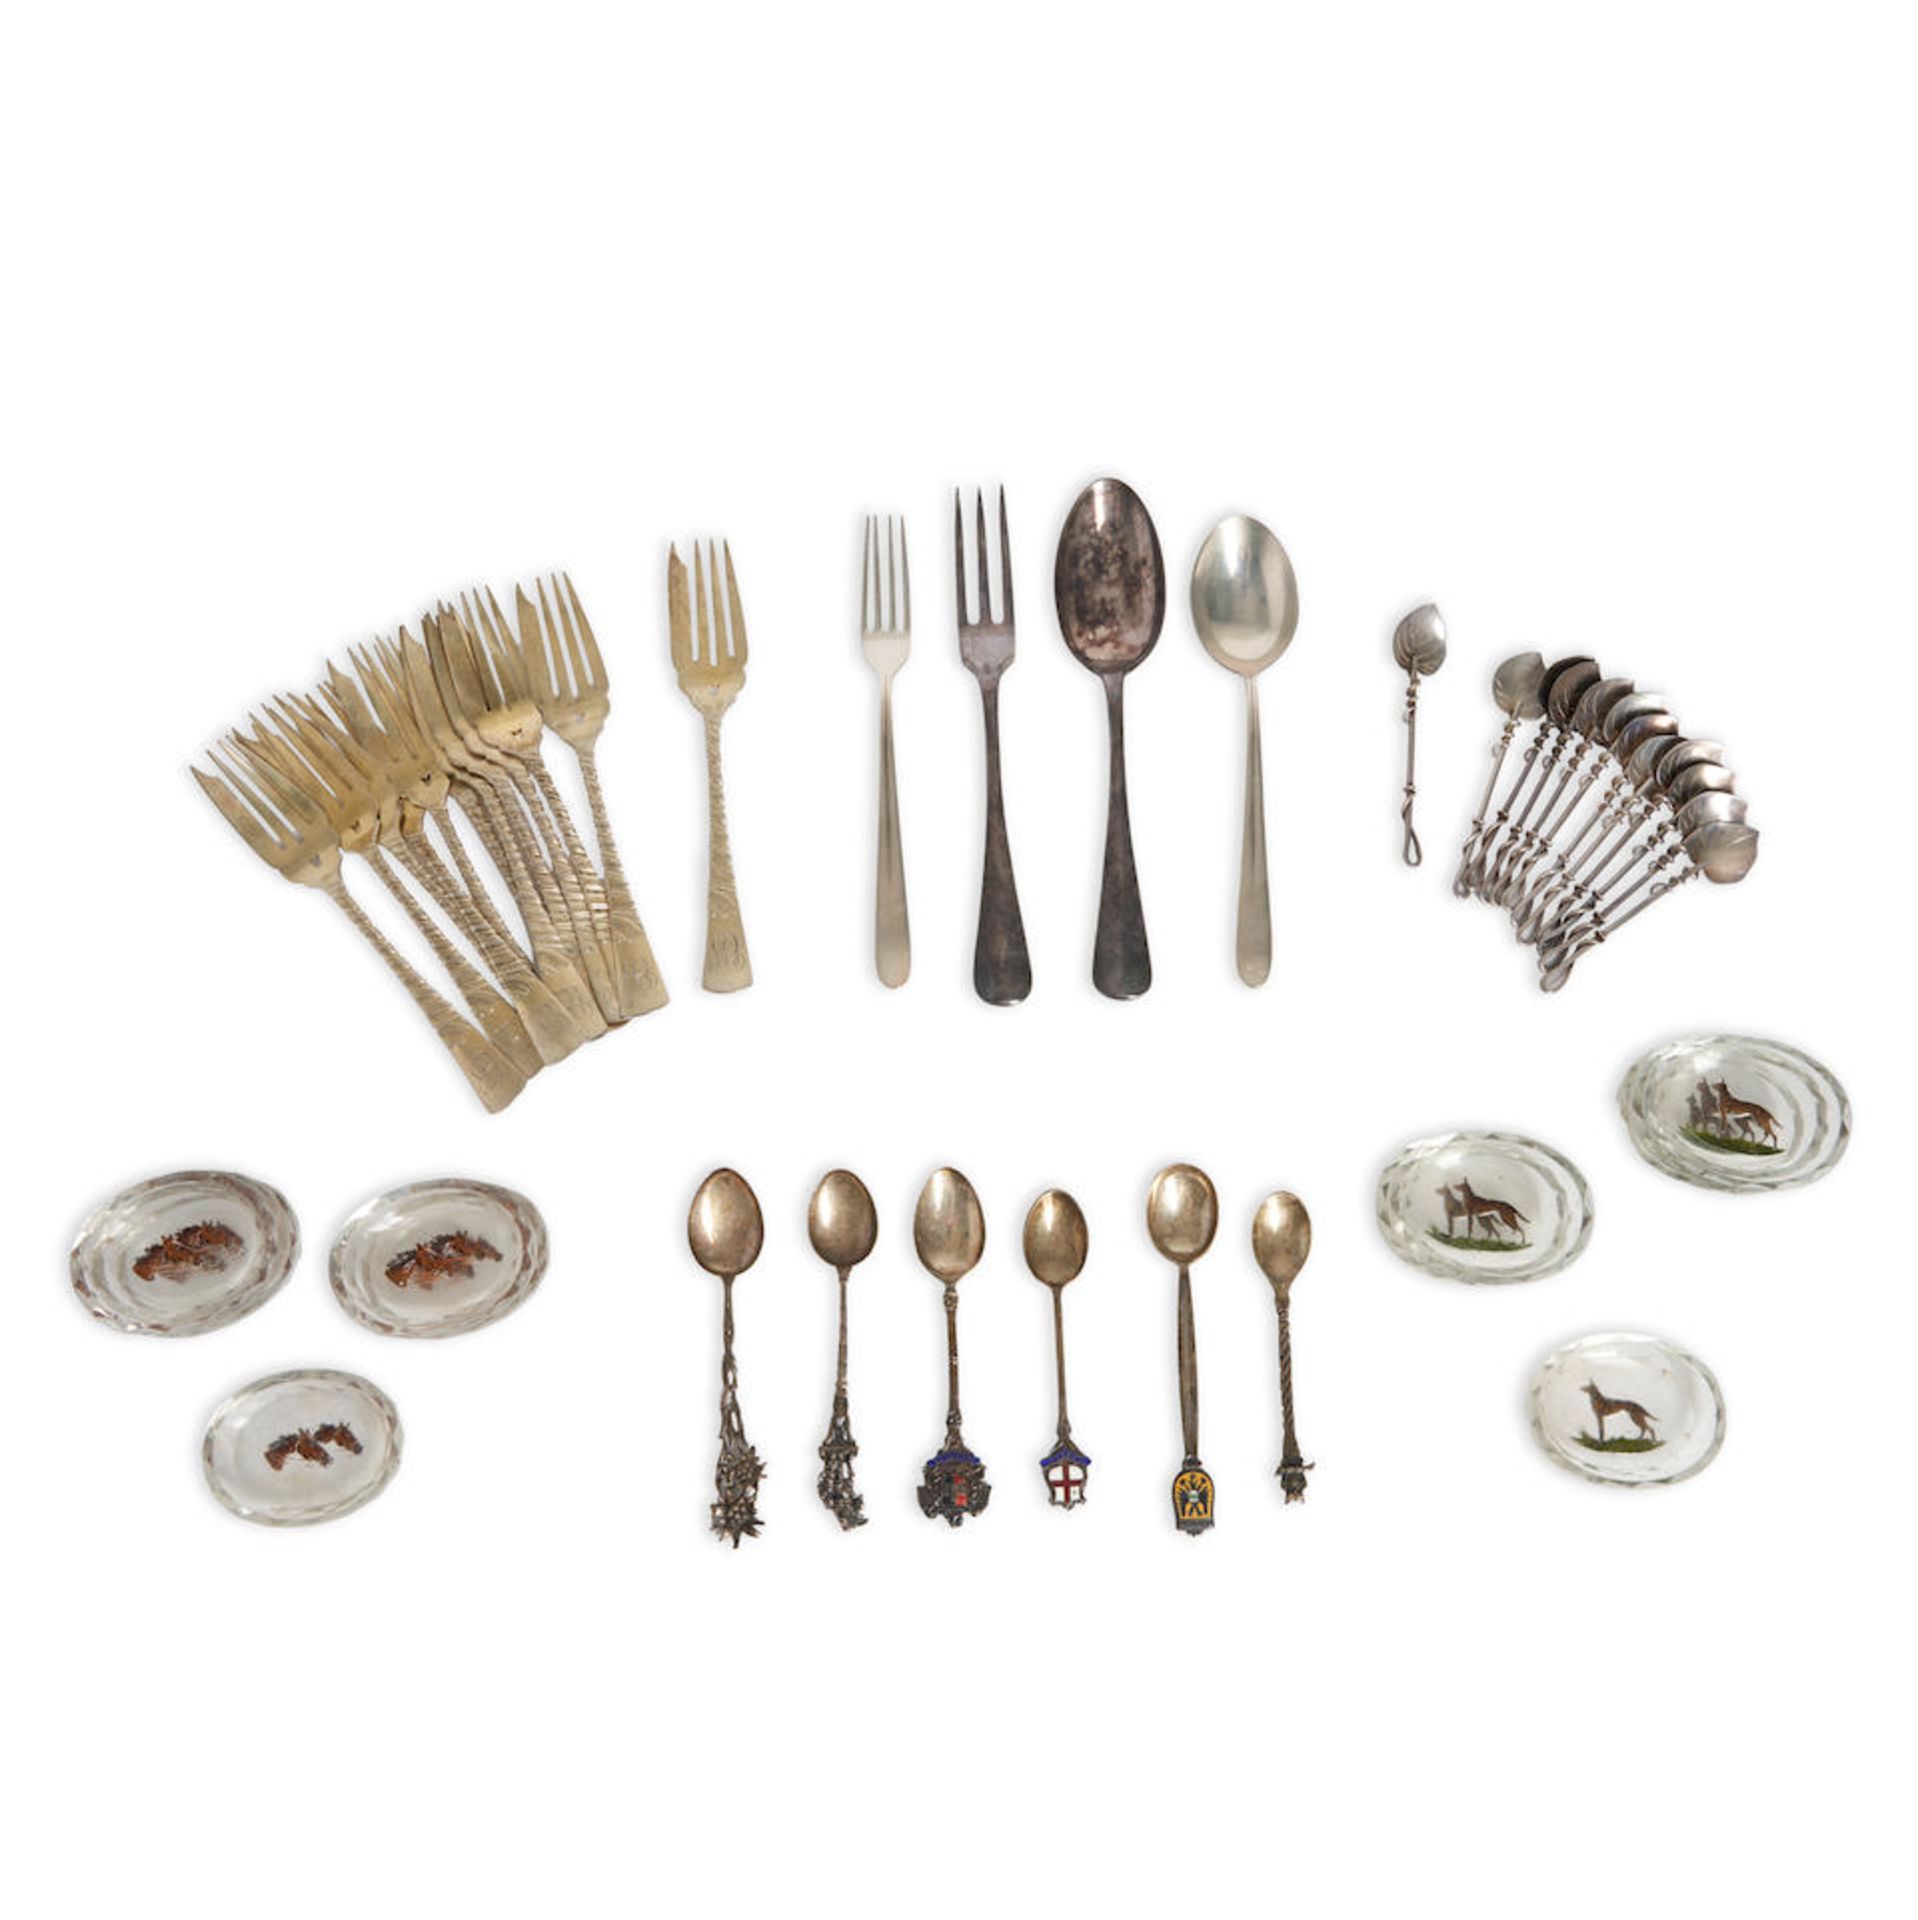 GROUP OF STERLING SILVER, .800 SILVER, AND SILVER-PLATED FLATWARE AND ENAMELED GLASS SALT CELLARS